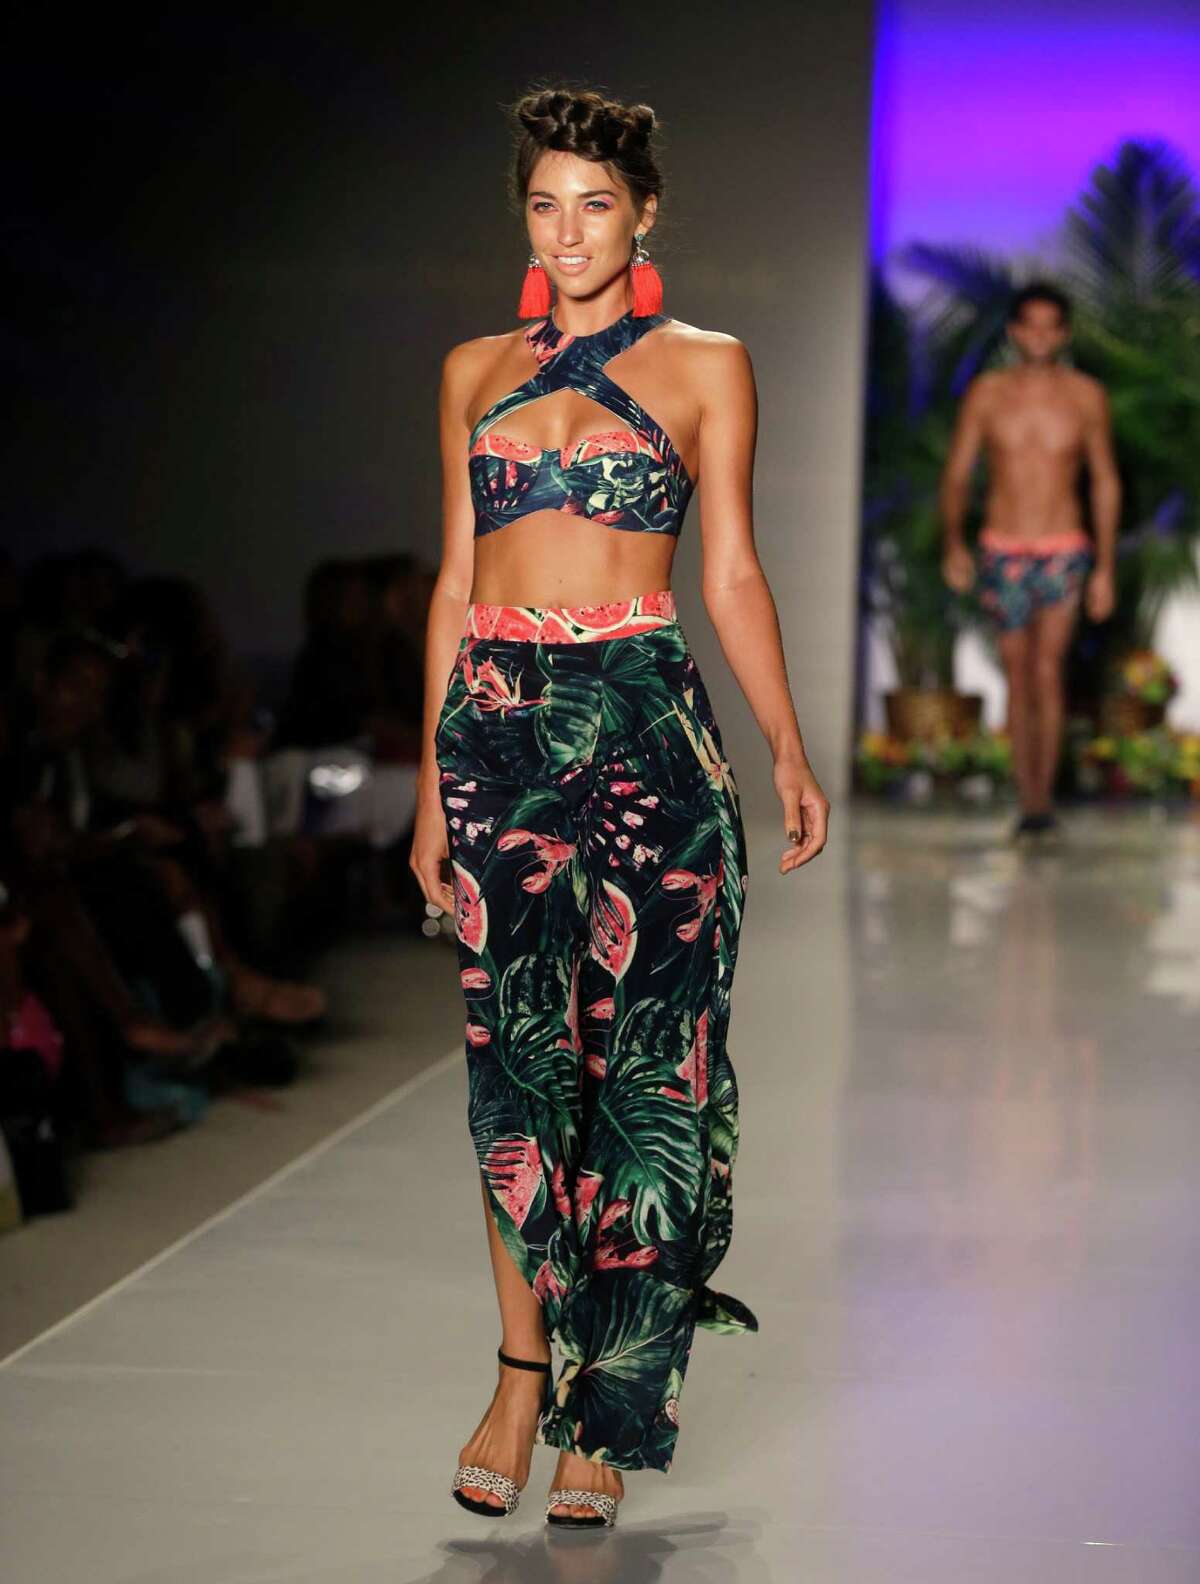 A model walks down the runway wearing swimwear designed by We Are Handsome during the Mercedes-Benz Fashion Week Swim show, Friday, July 18, 2014, in Miami Beach, Fla.